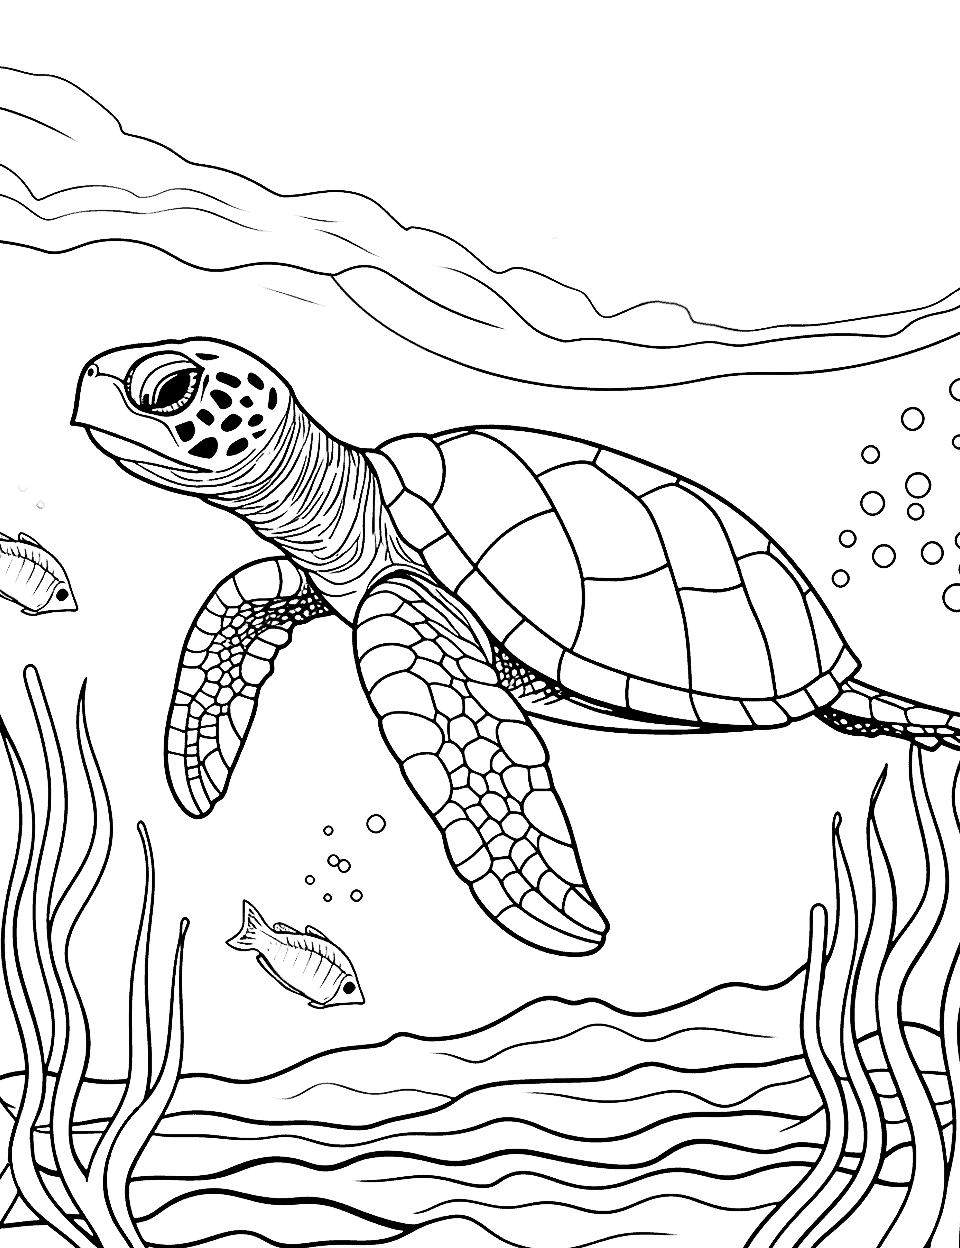 Dive into the Blue Turtle Coloring Page - An underwater scene of a turtle diving deep into the blue ocean.